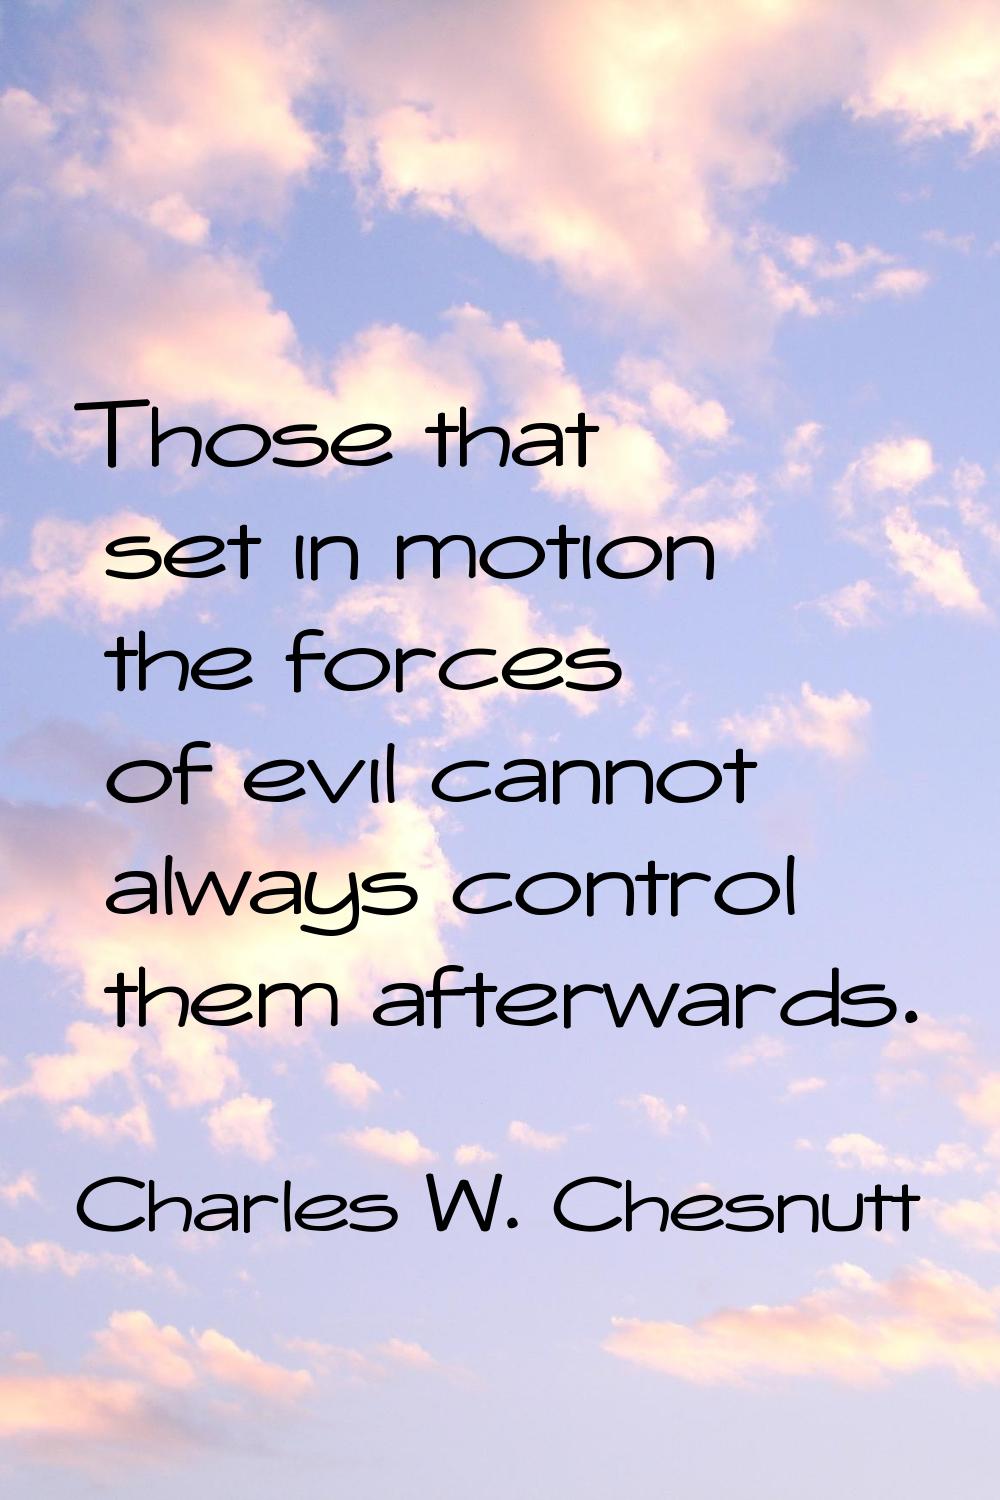 Those that set in motion the forces of evil cannot always control them afterwards.